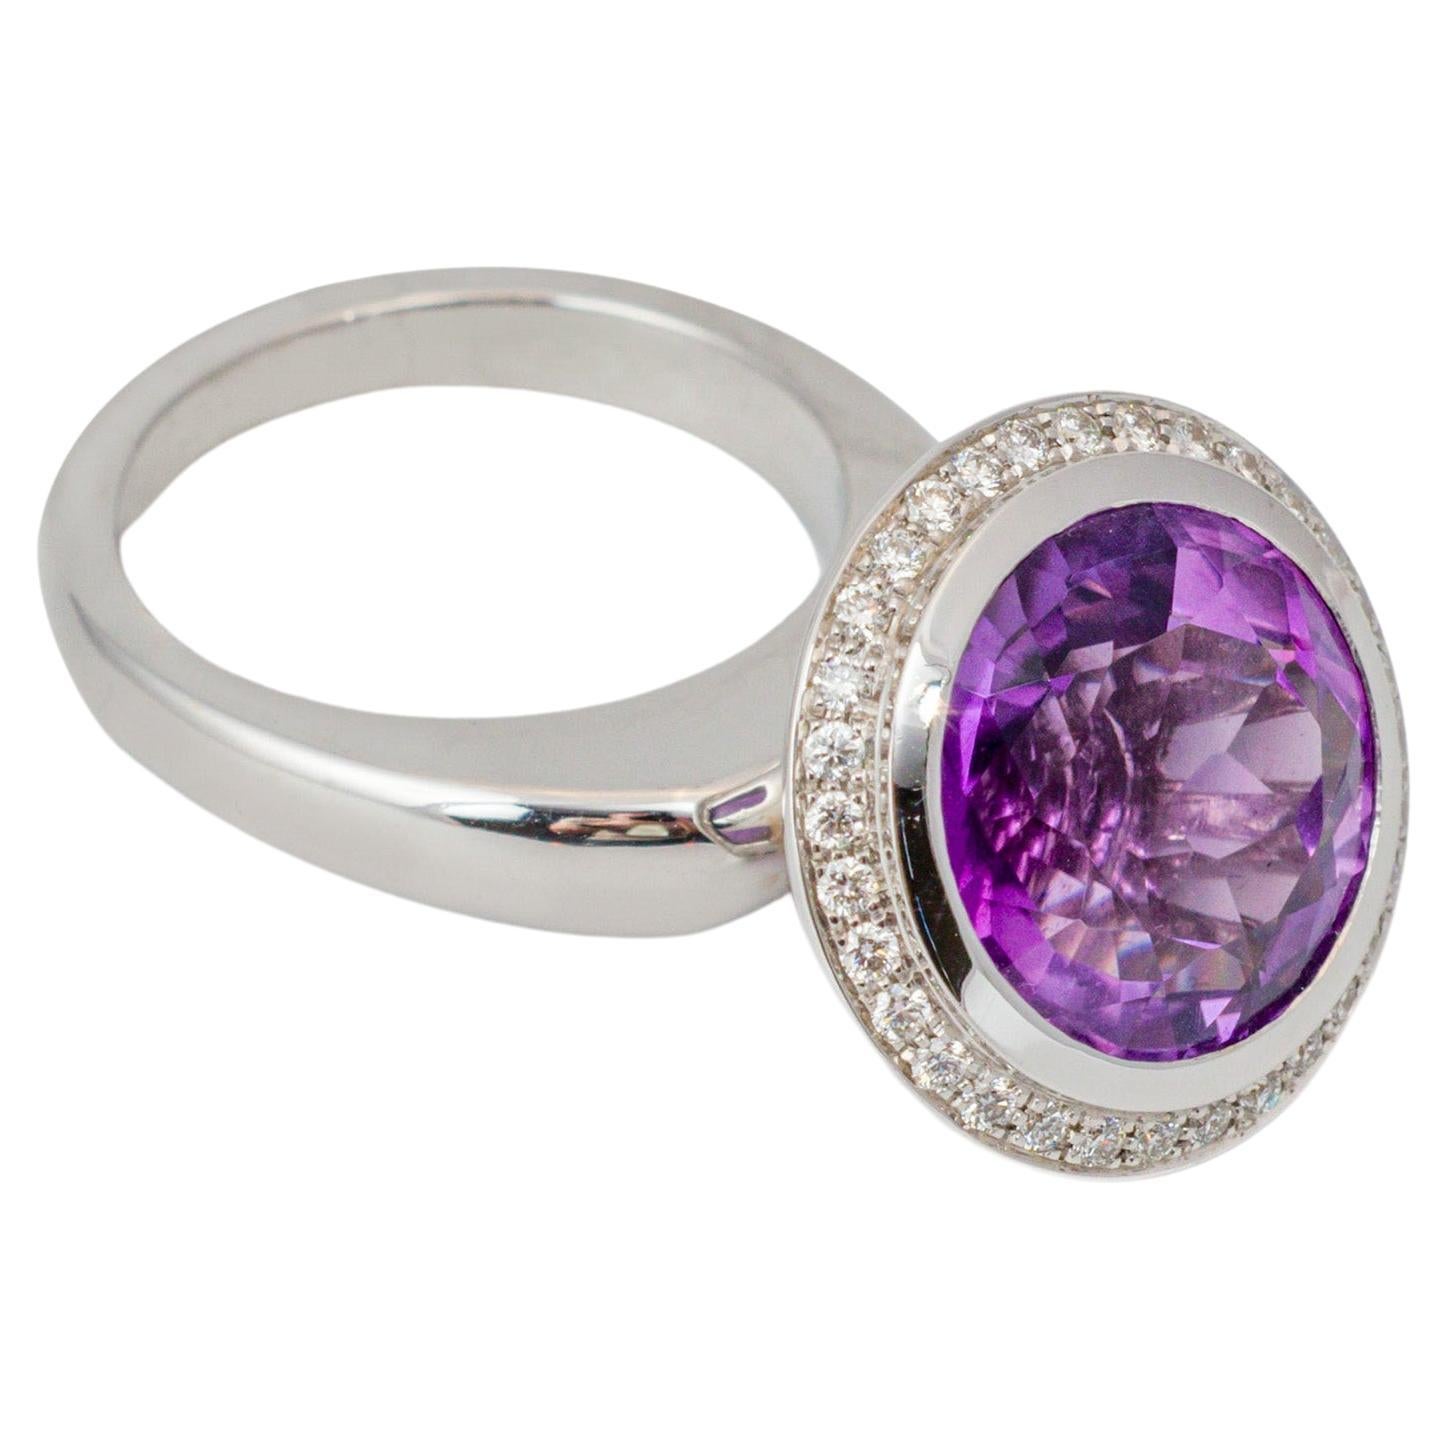 "Costis" Circle In Motion Ring with 10.24 carats Purple Amethyst and Diamonds For Sale